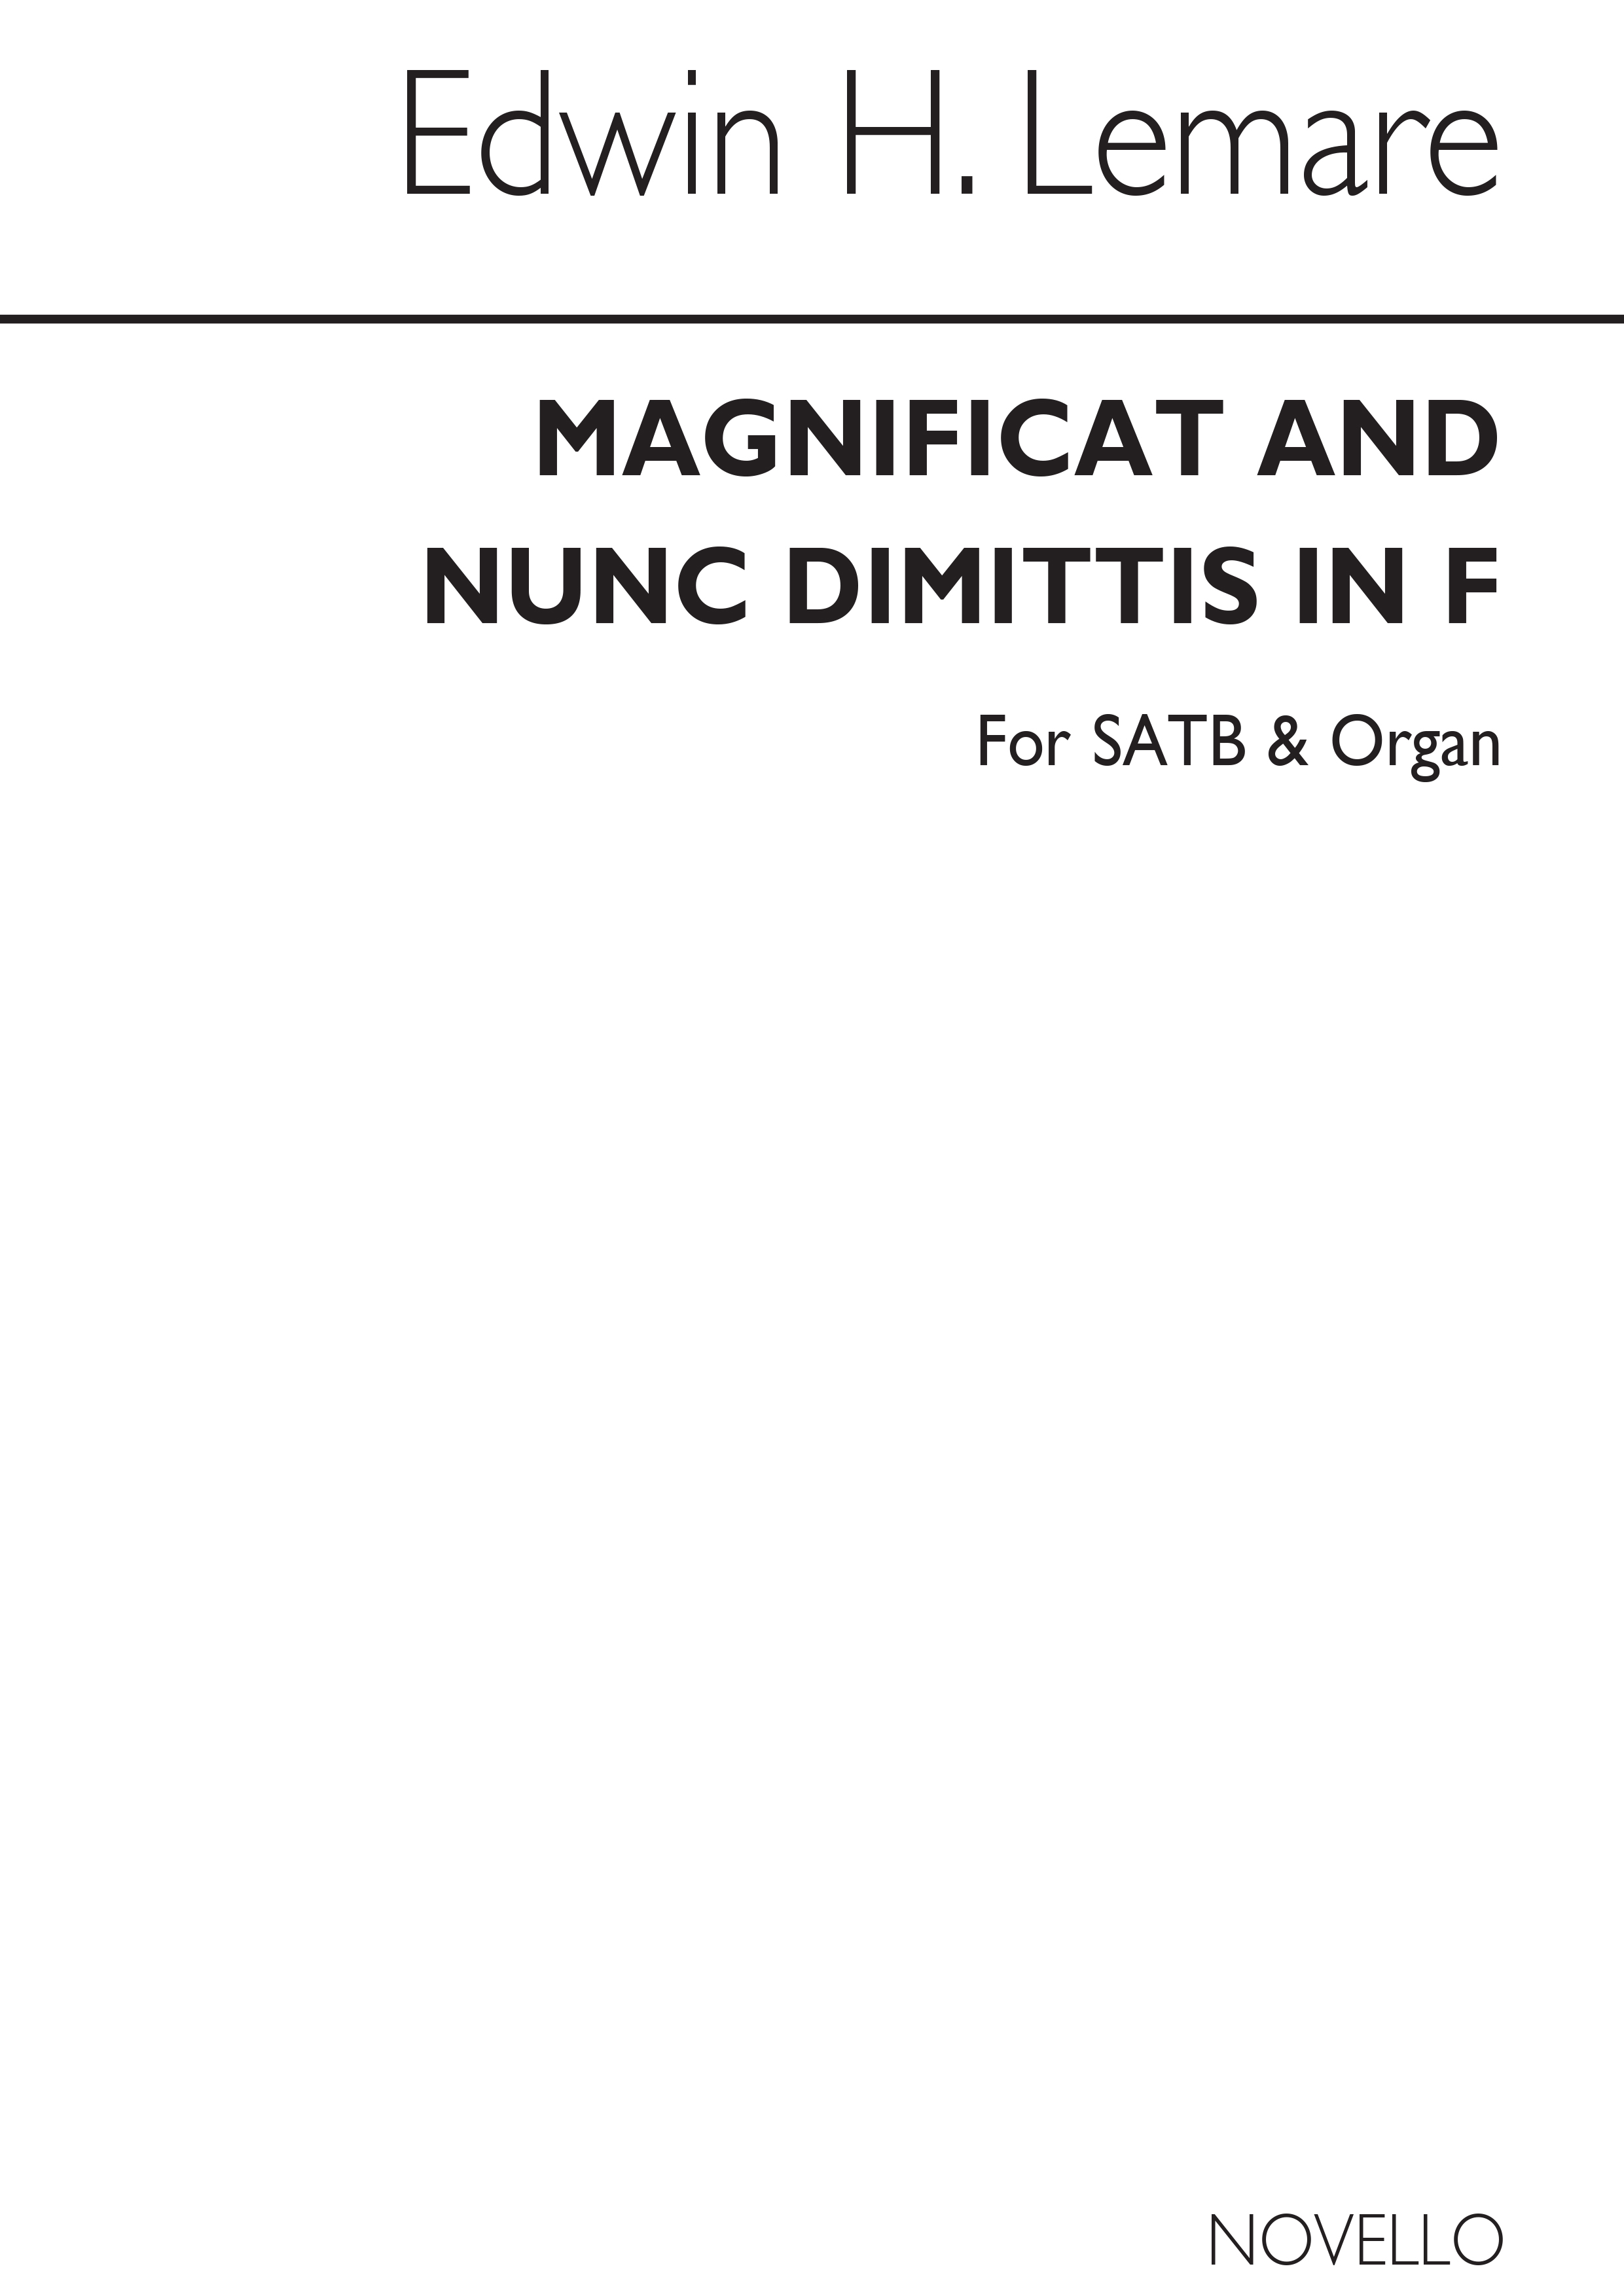 Edwin Lemare: Magnificat And Nunc Dimittis In F (Cocks Edition)